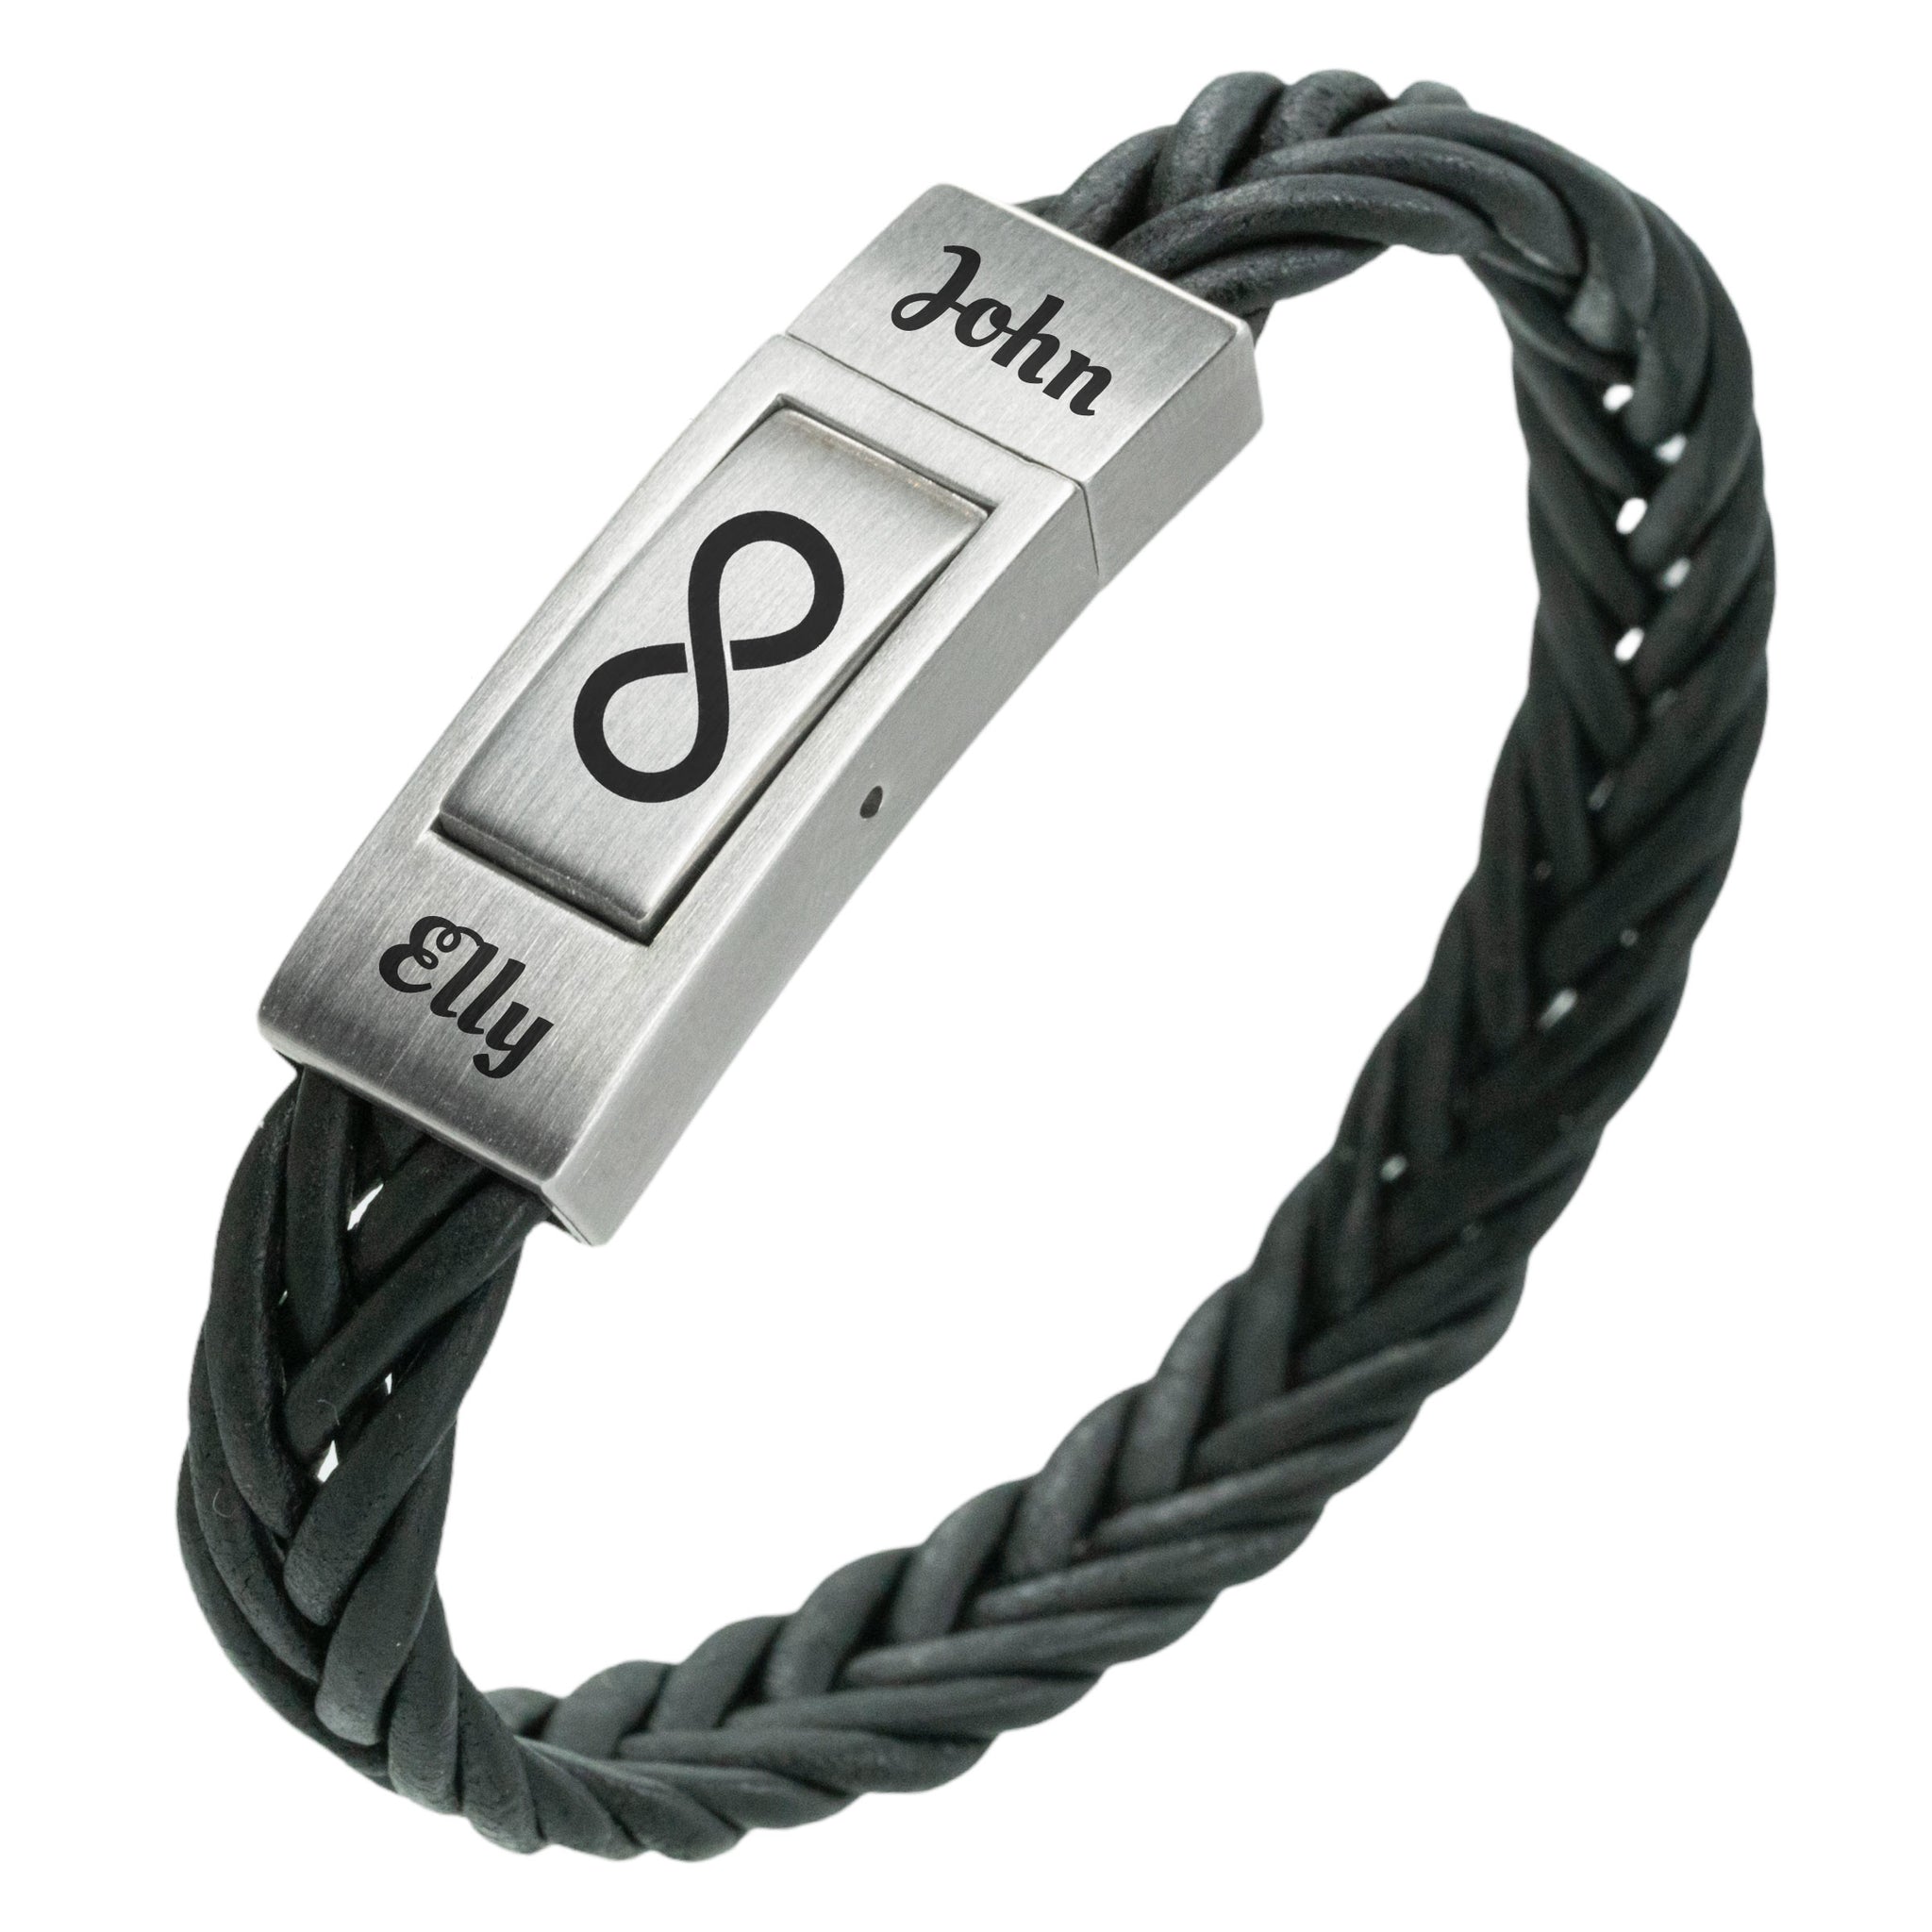 Pressure switch with name engraving - braided black leather